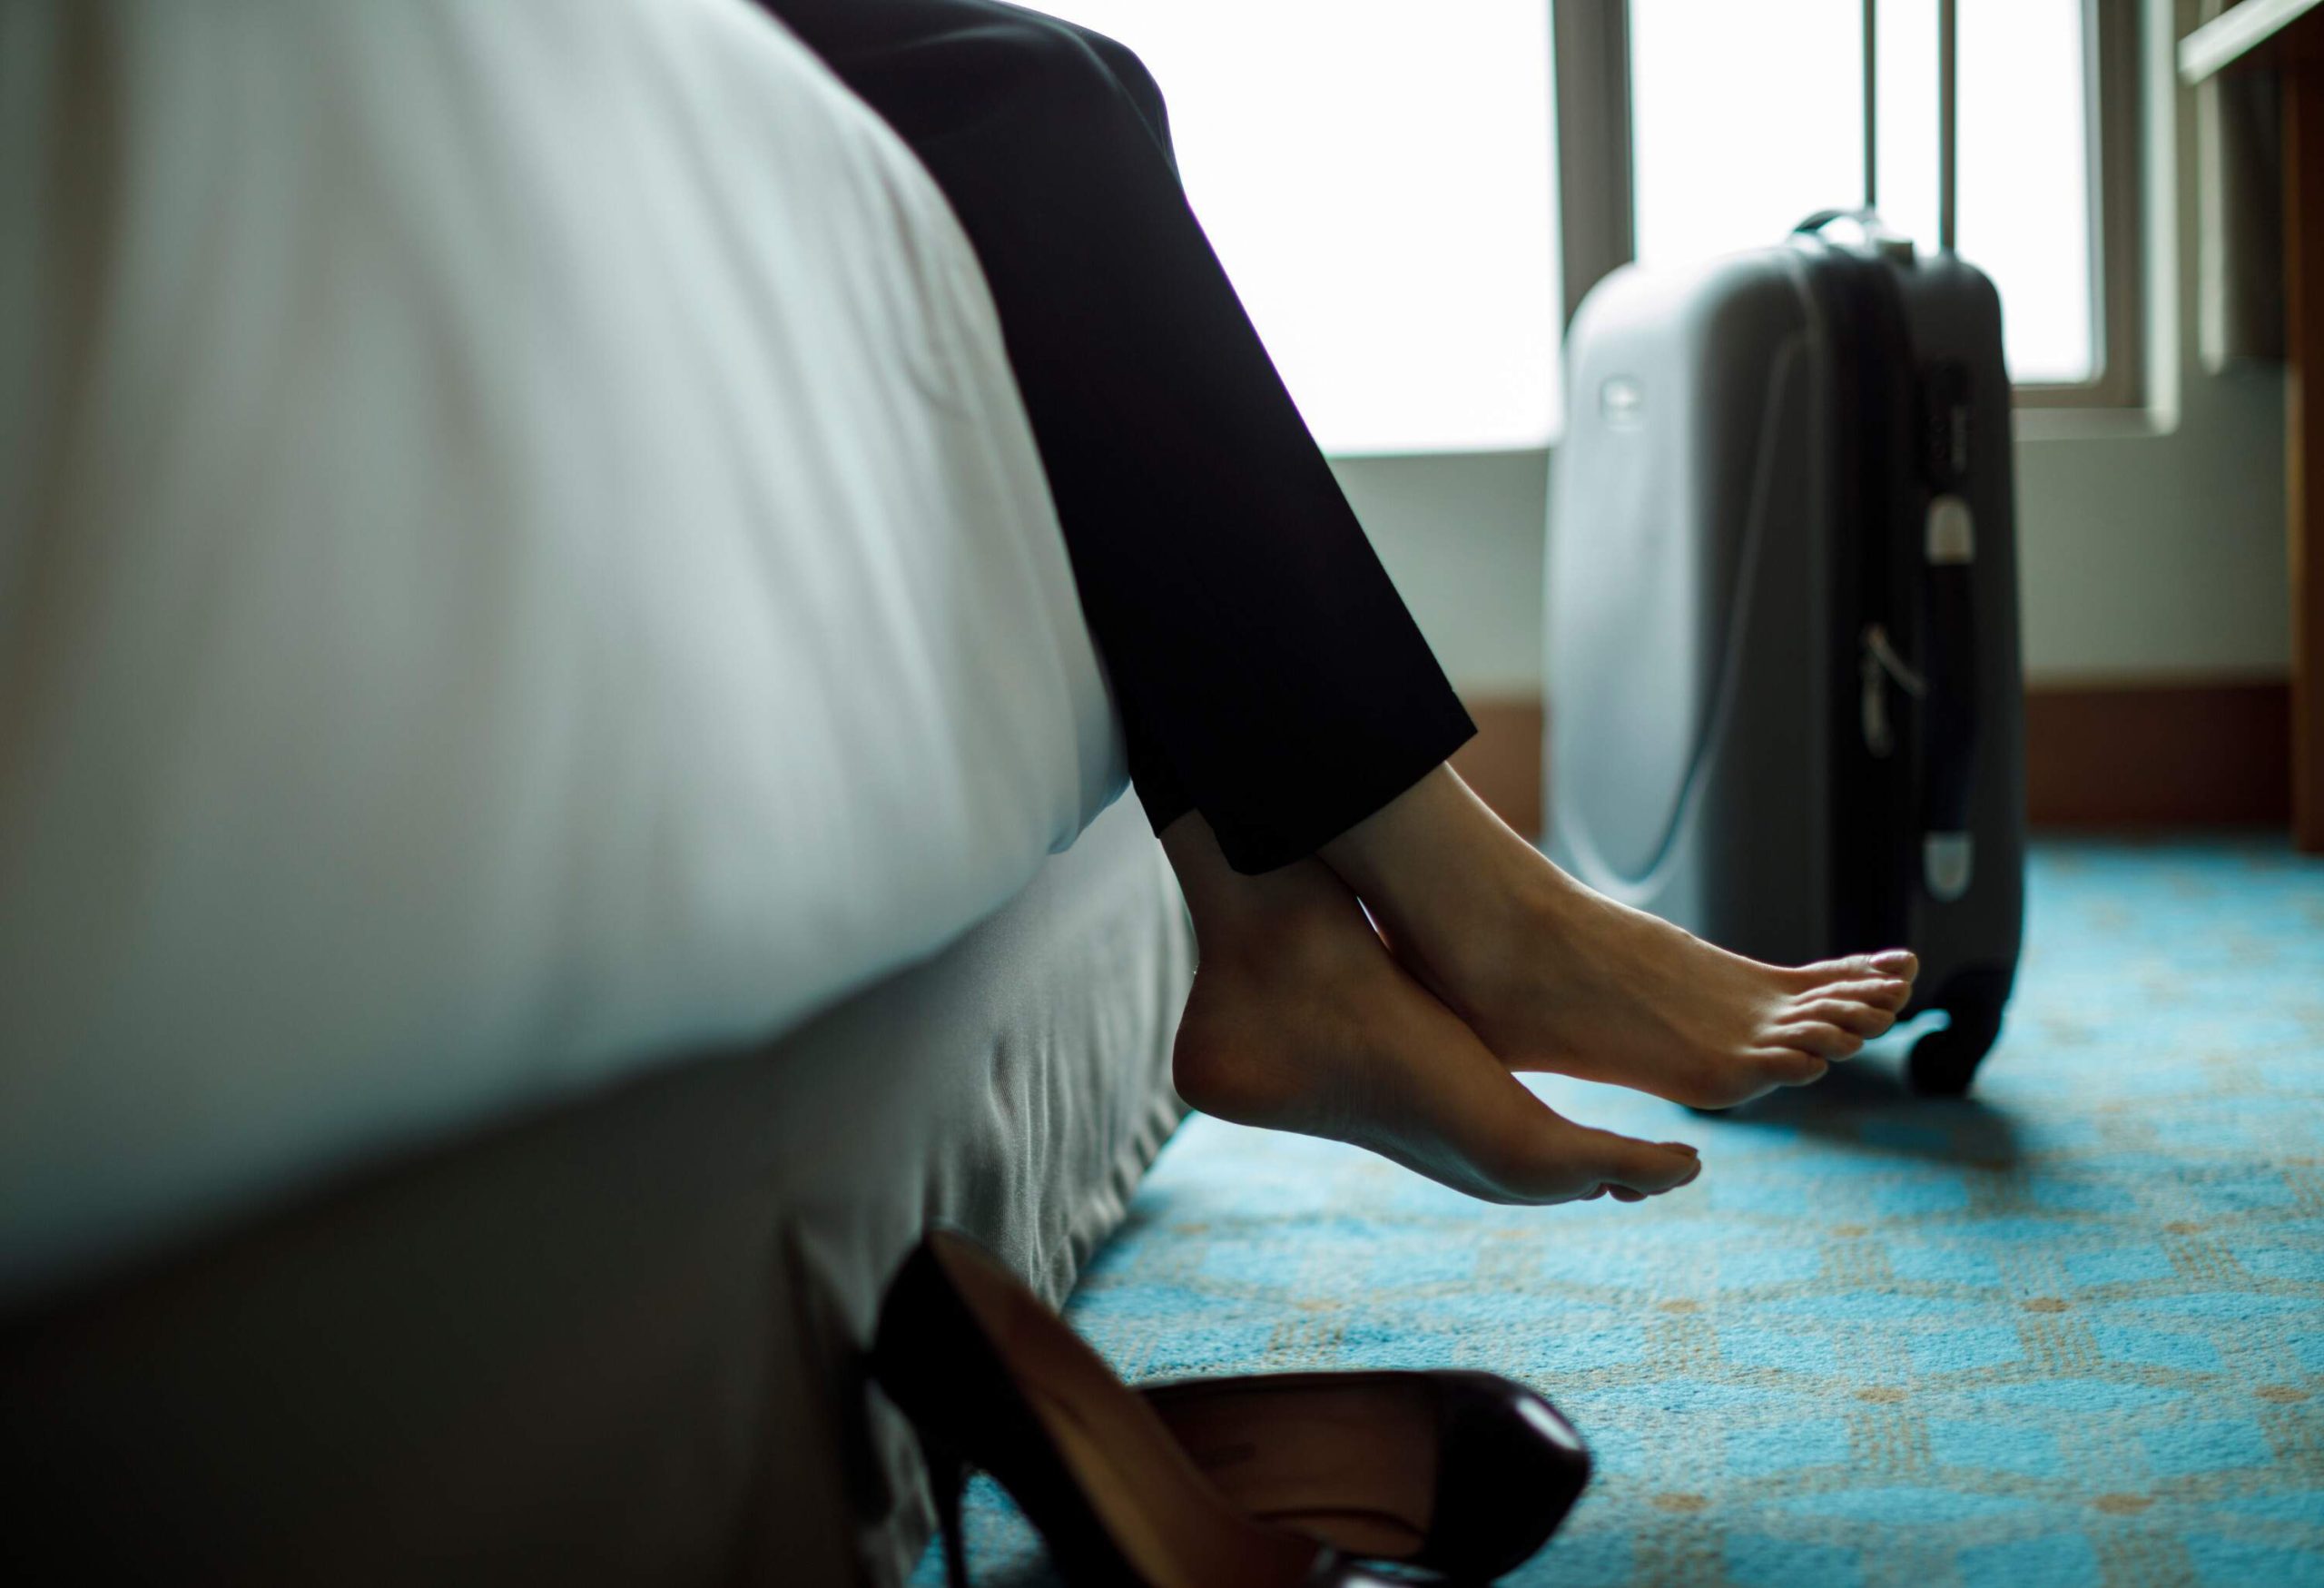 theme_travel_hotel_room_bed_woman_relaxing_gettyimages-945106690